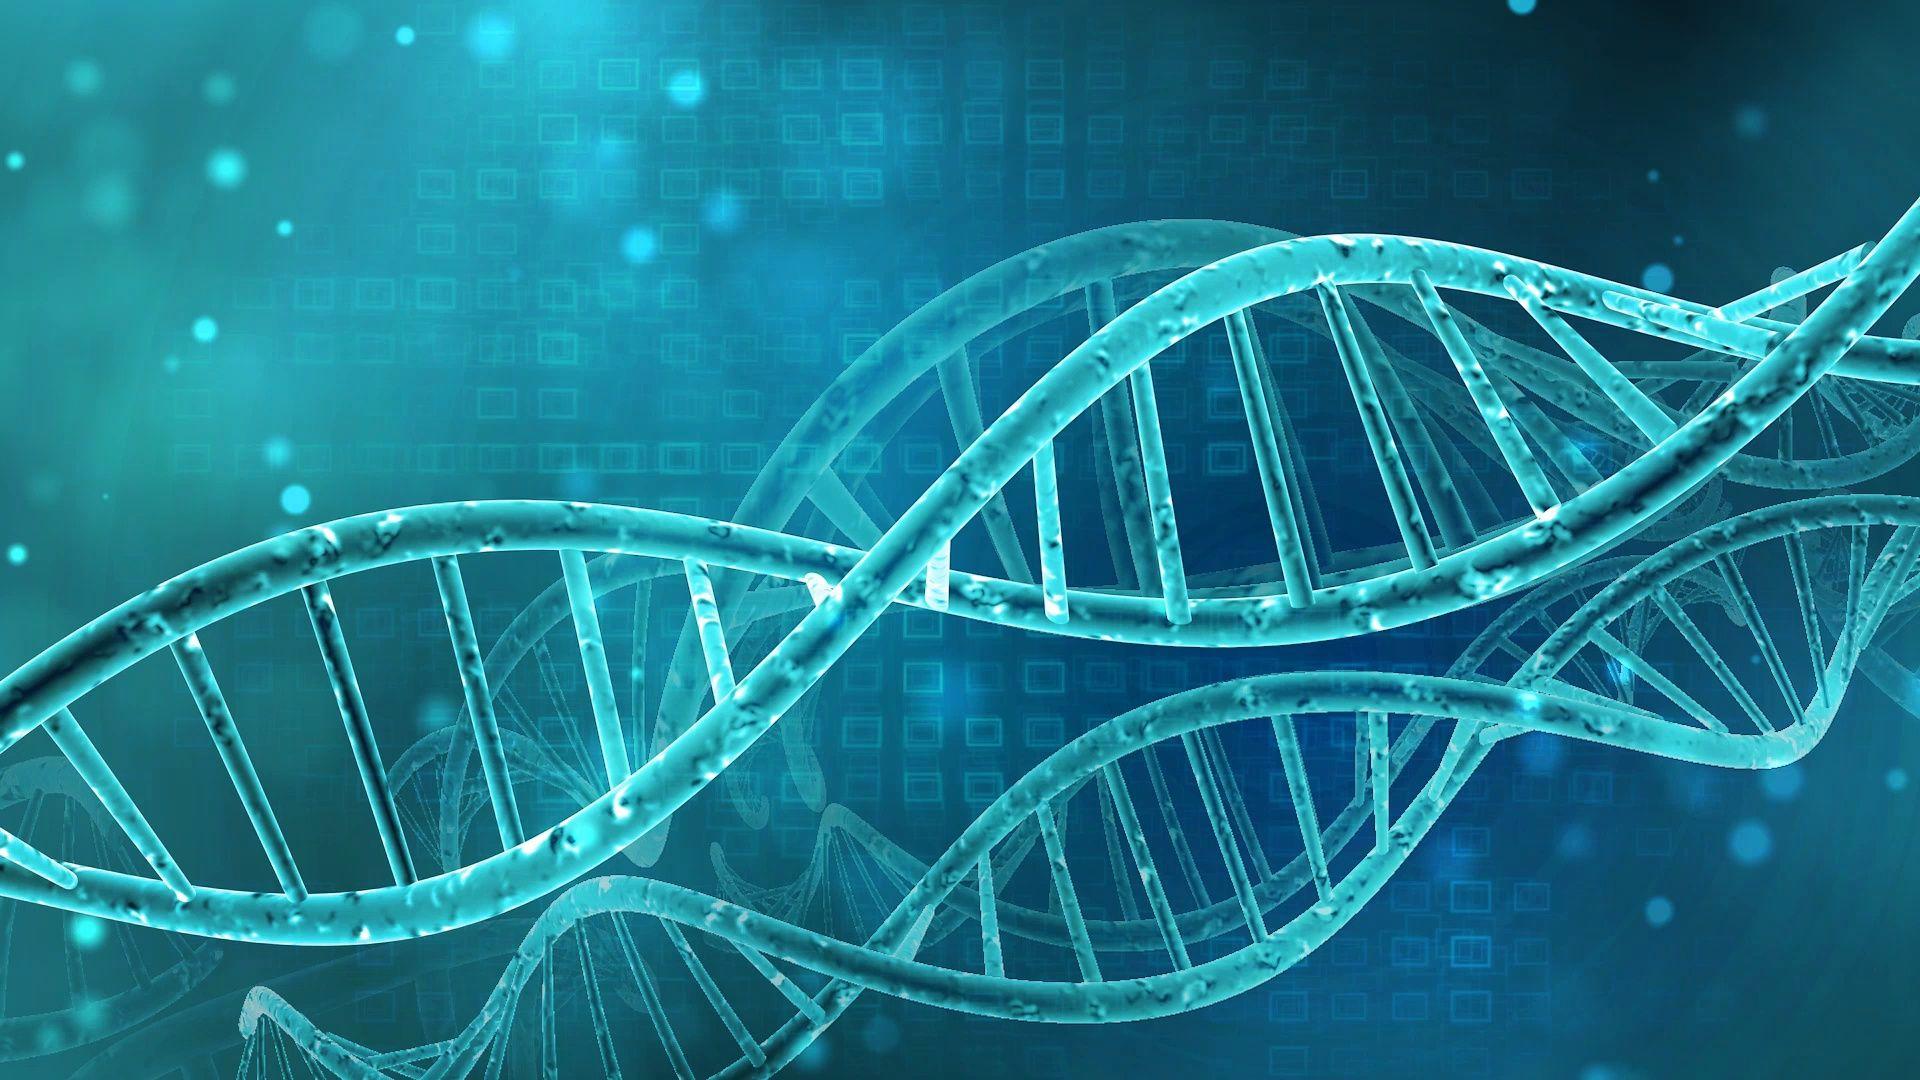 Blue and Green Double Helix Logo - Video: DNA double helix green blue background ~ #90161124